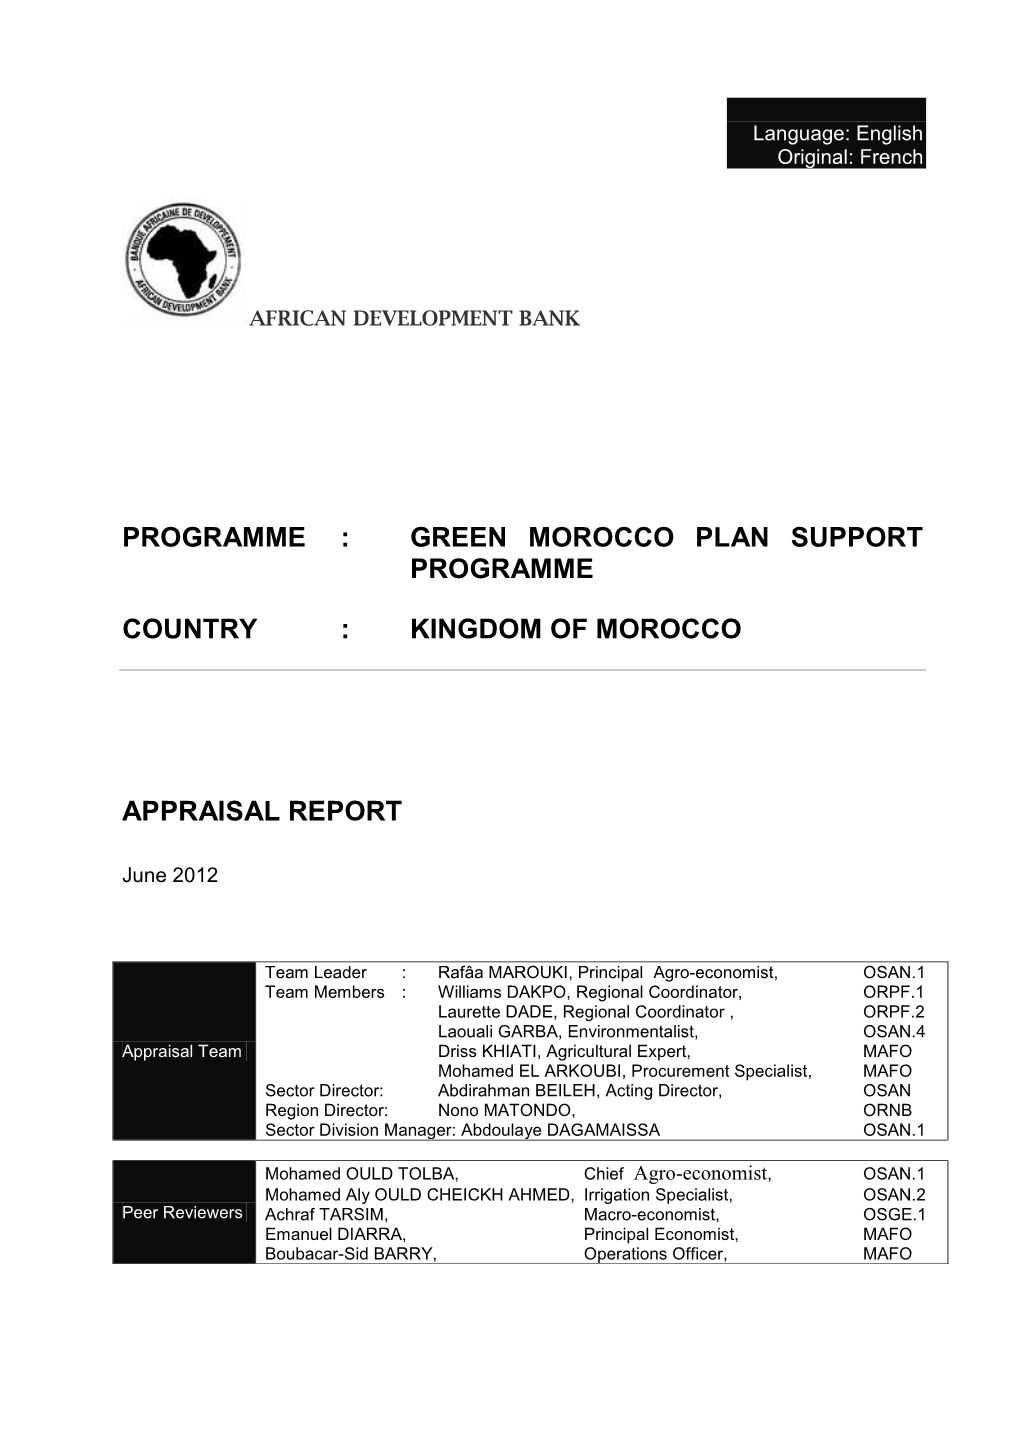 Green Morocco Plan Support Programme